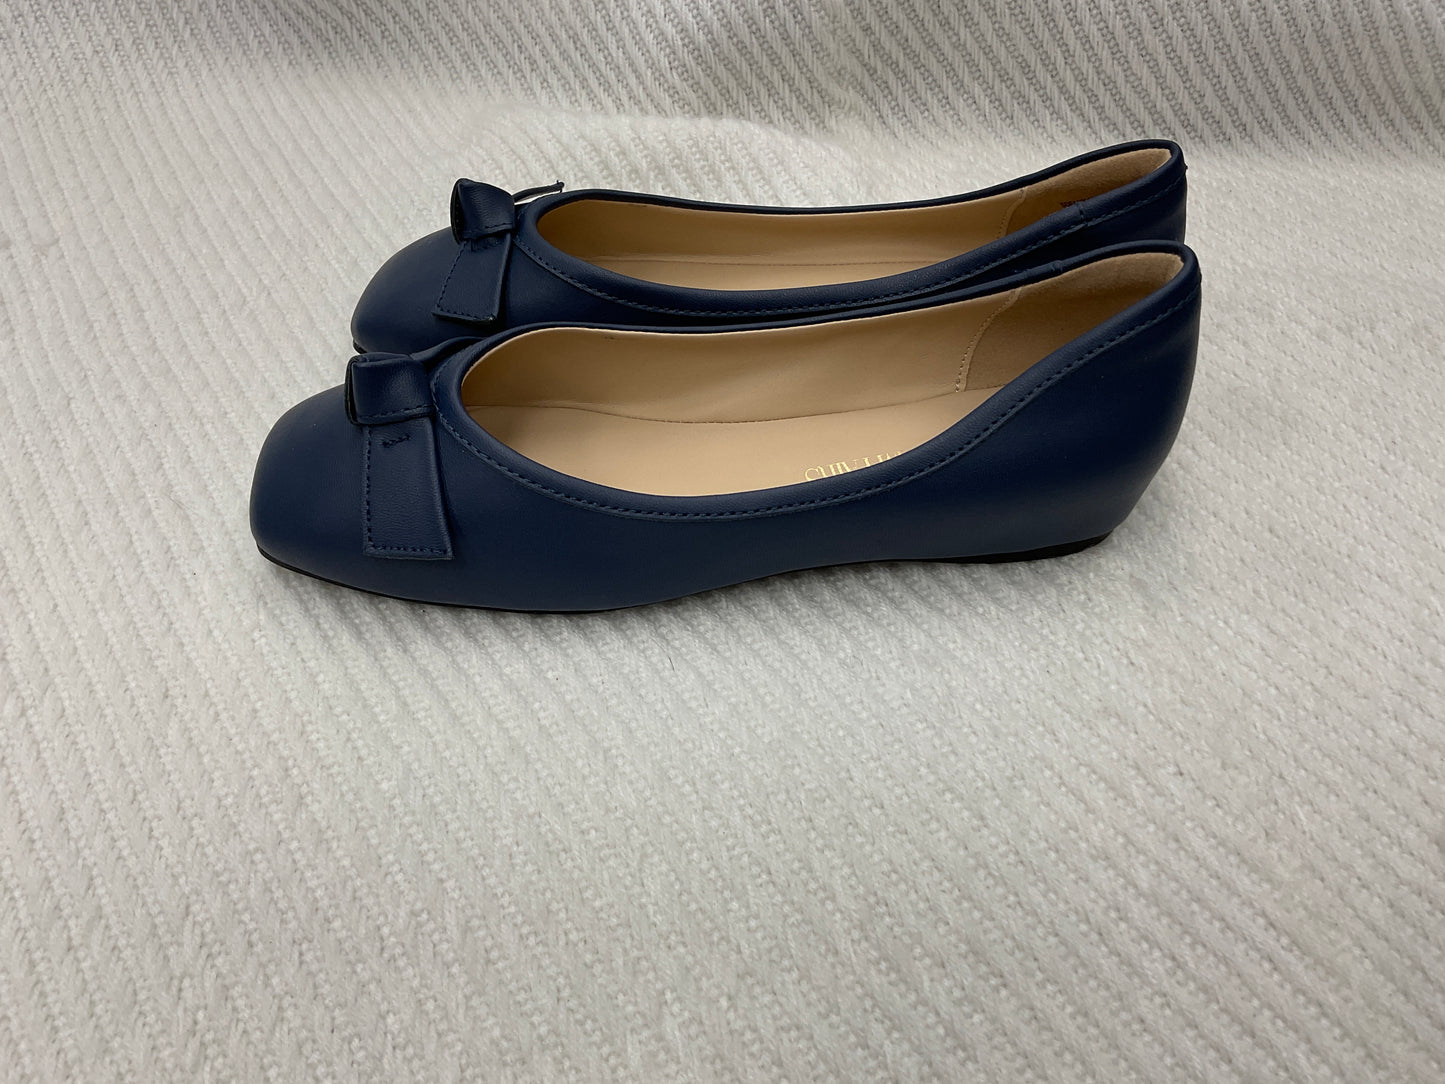 Shoes Flats By Clothes Mentor  Size: 6